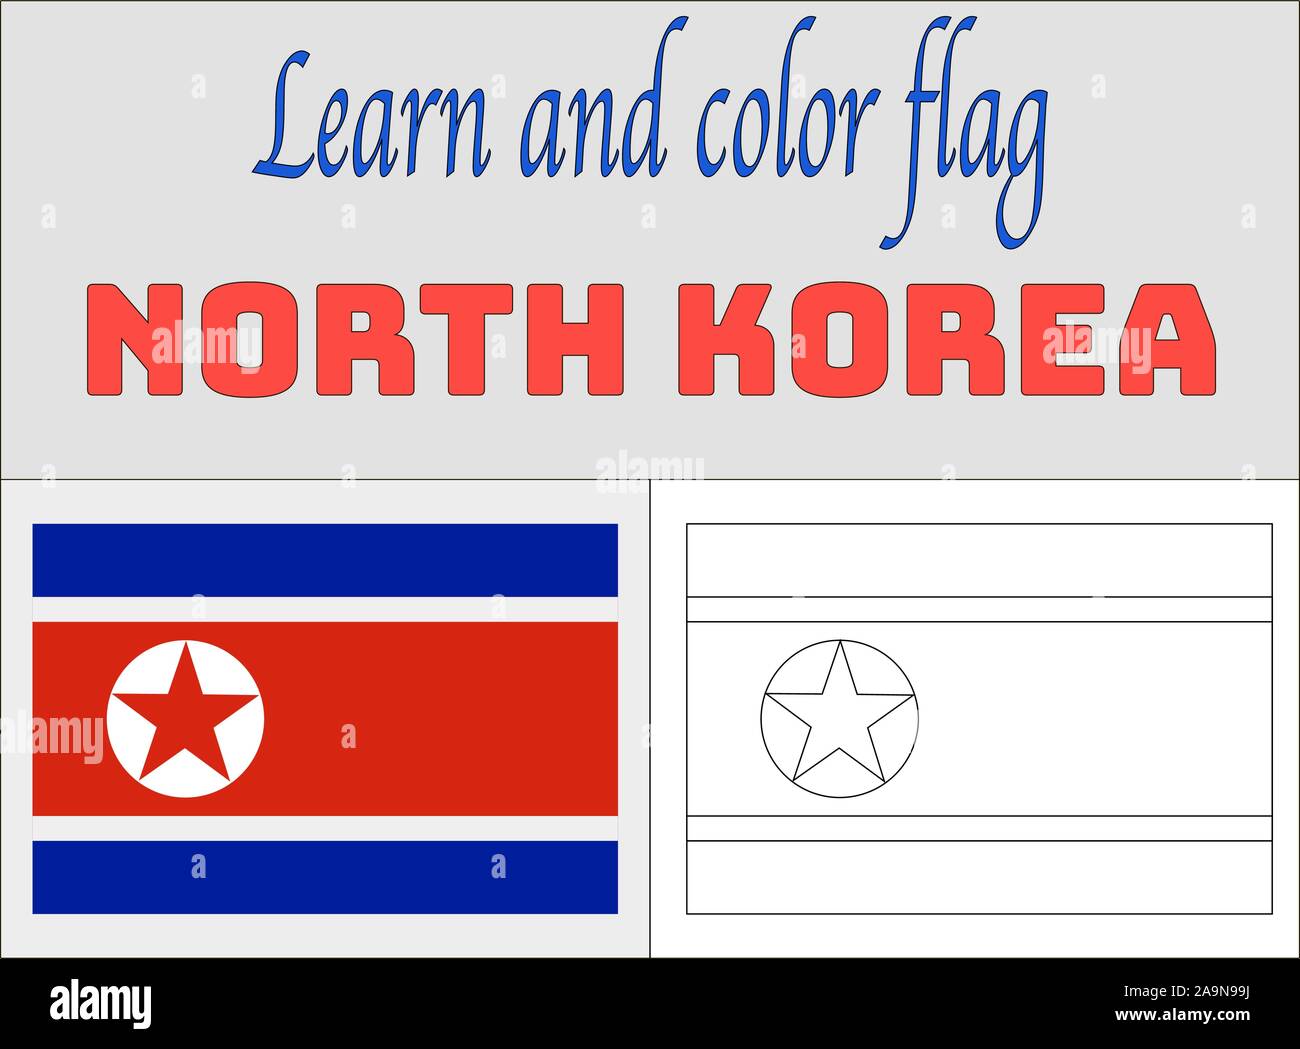 North korea national flag coloring book pages for education and learning original colors proportion vector illustration countries set stock vector image art